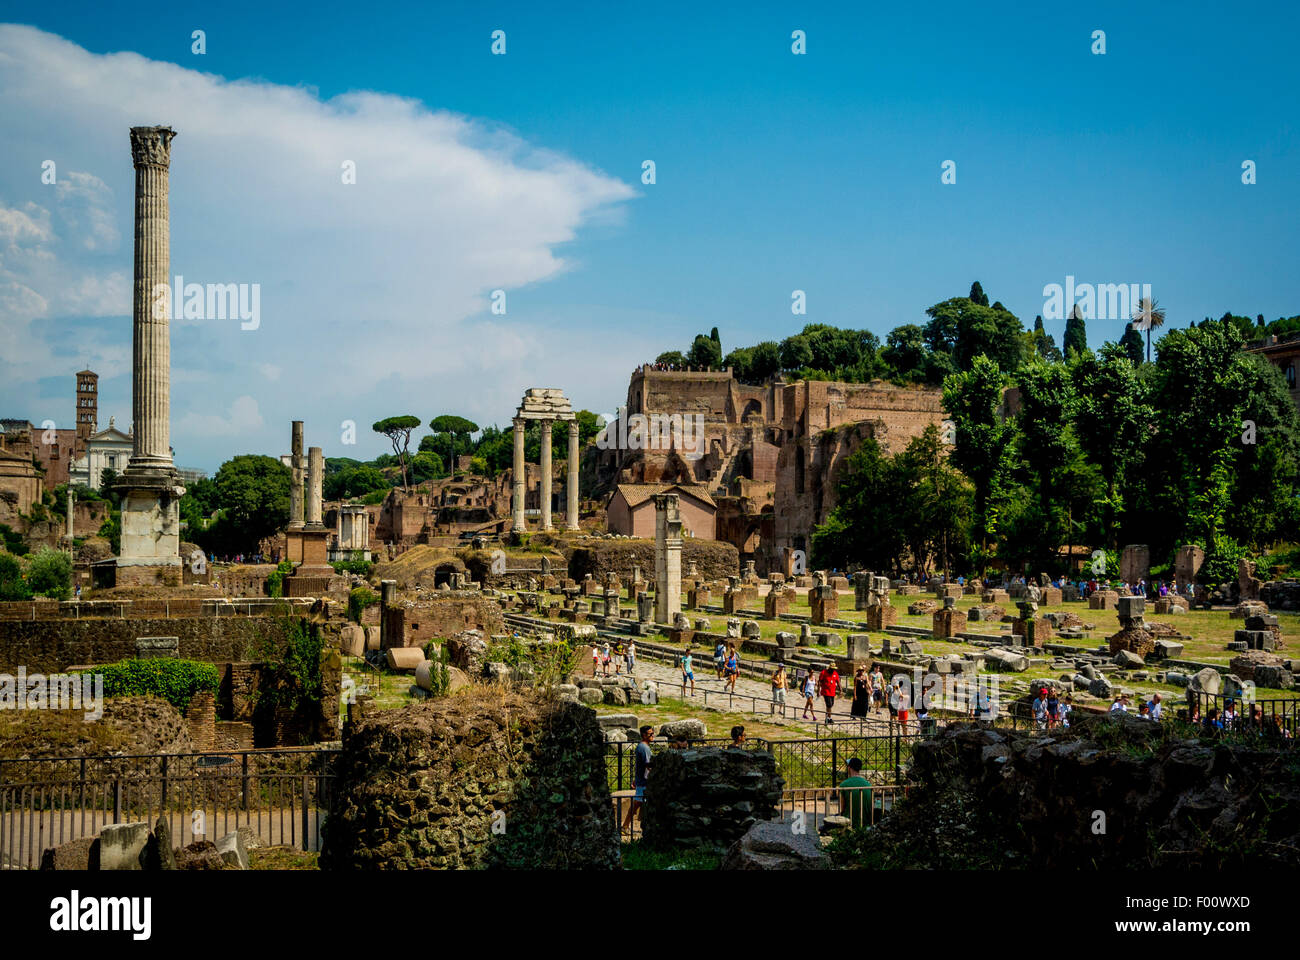 Three Pillars of the Temple of Castor and Pollux and Column of Phocas, Colonna di Foca in the Roman Forum. Stock Photo